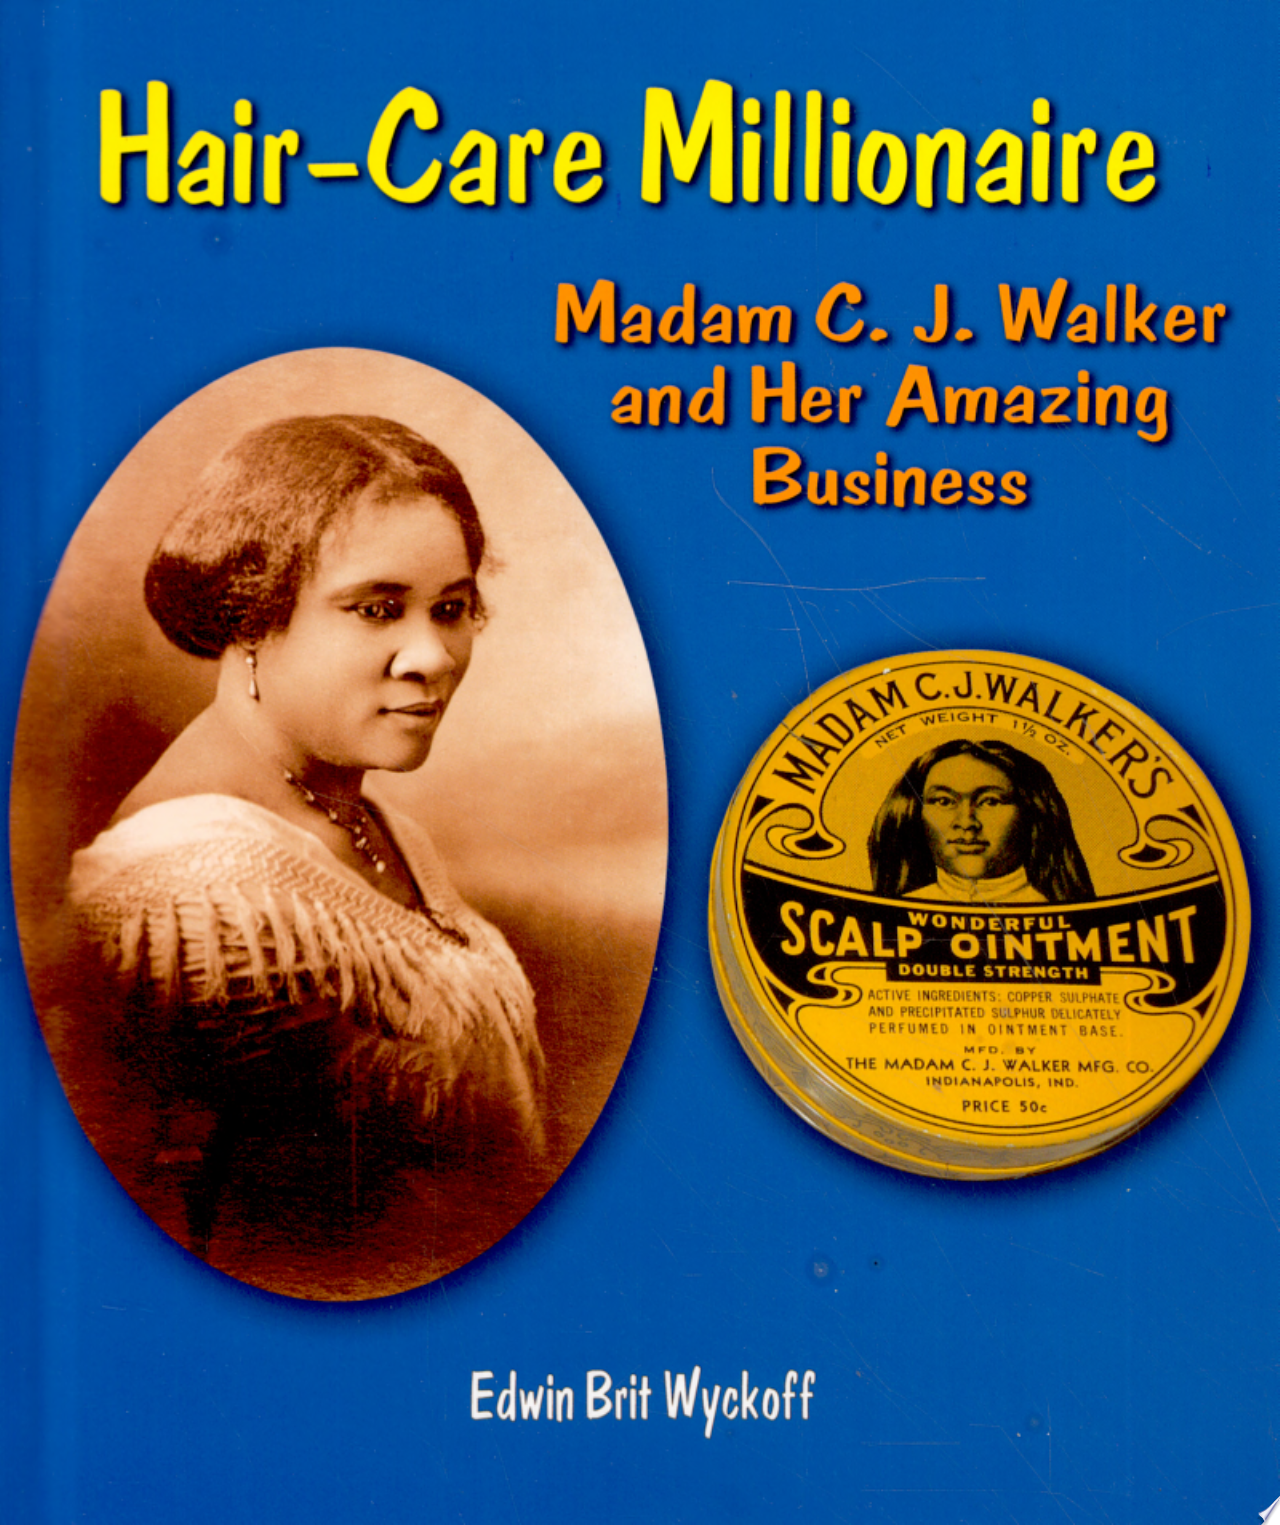 Image for "Hair-Care Millionaire"